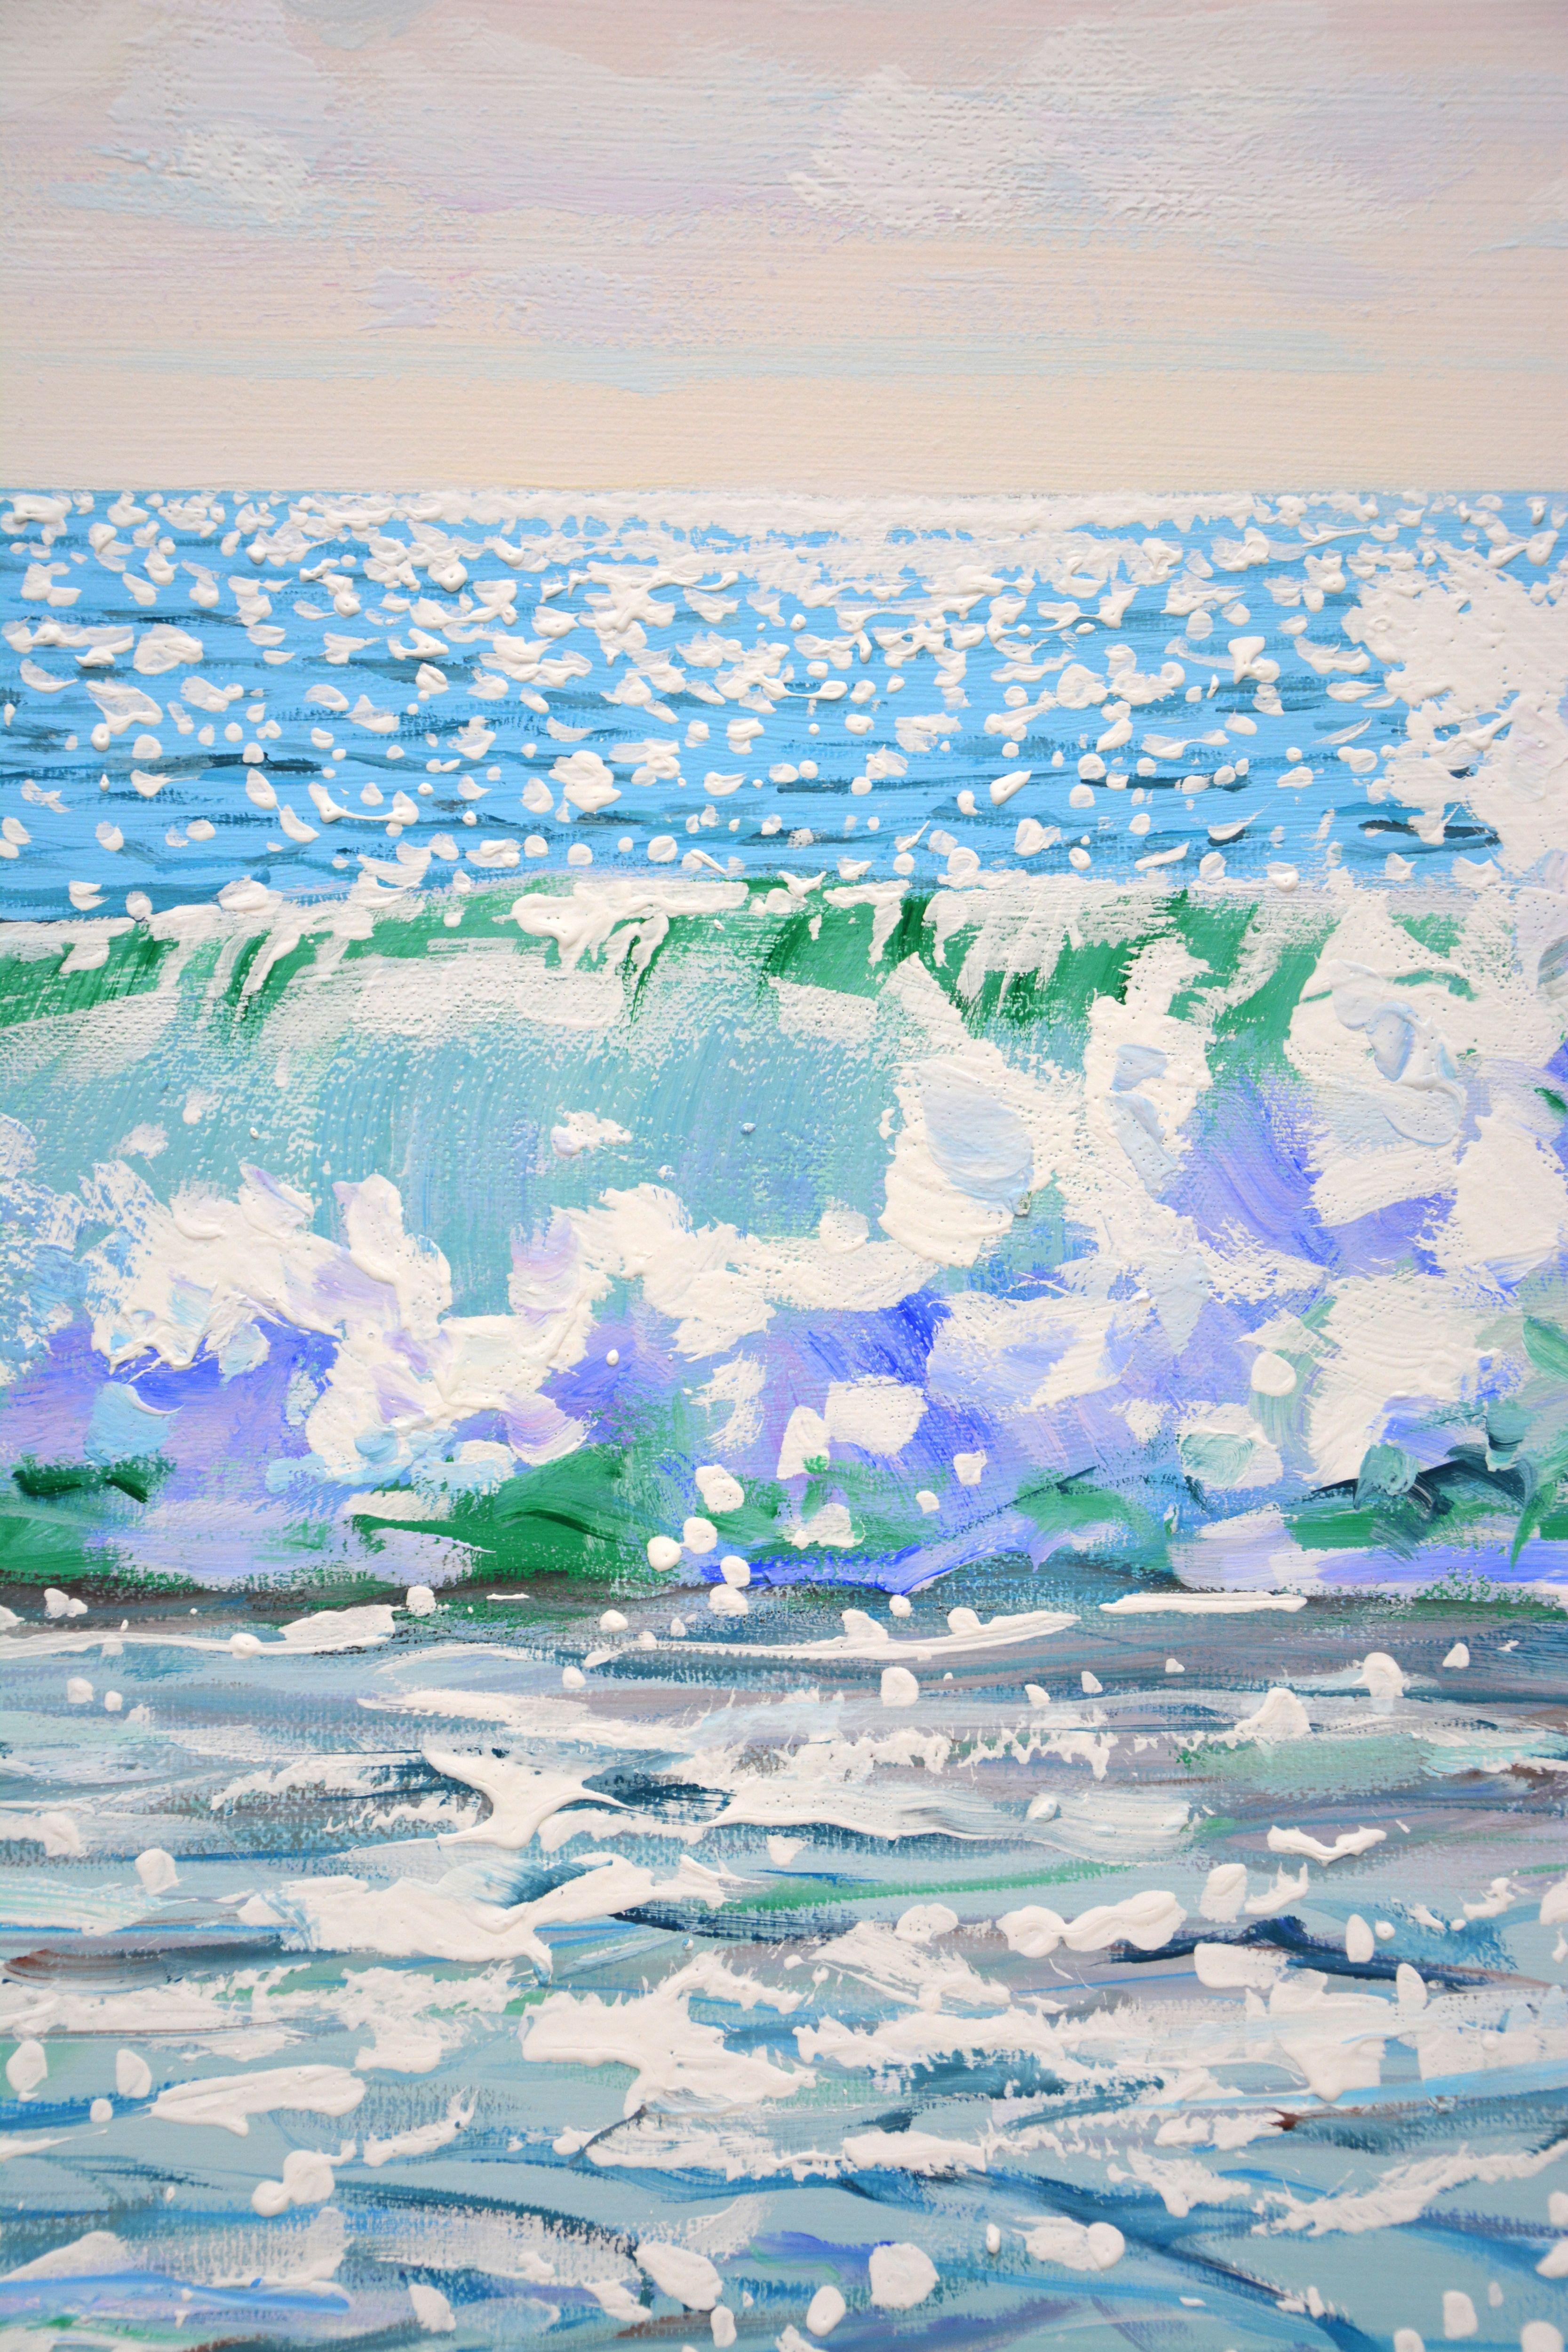 Sea bliss. The sea, clear sky, waves, sea foam, sun glare on the water create an atmosphere of relaxation and romance. Made in the style of realism. Part of a permanent series of seascapes. The picture is of good quality, the colors make children